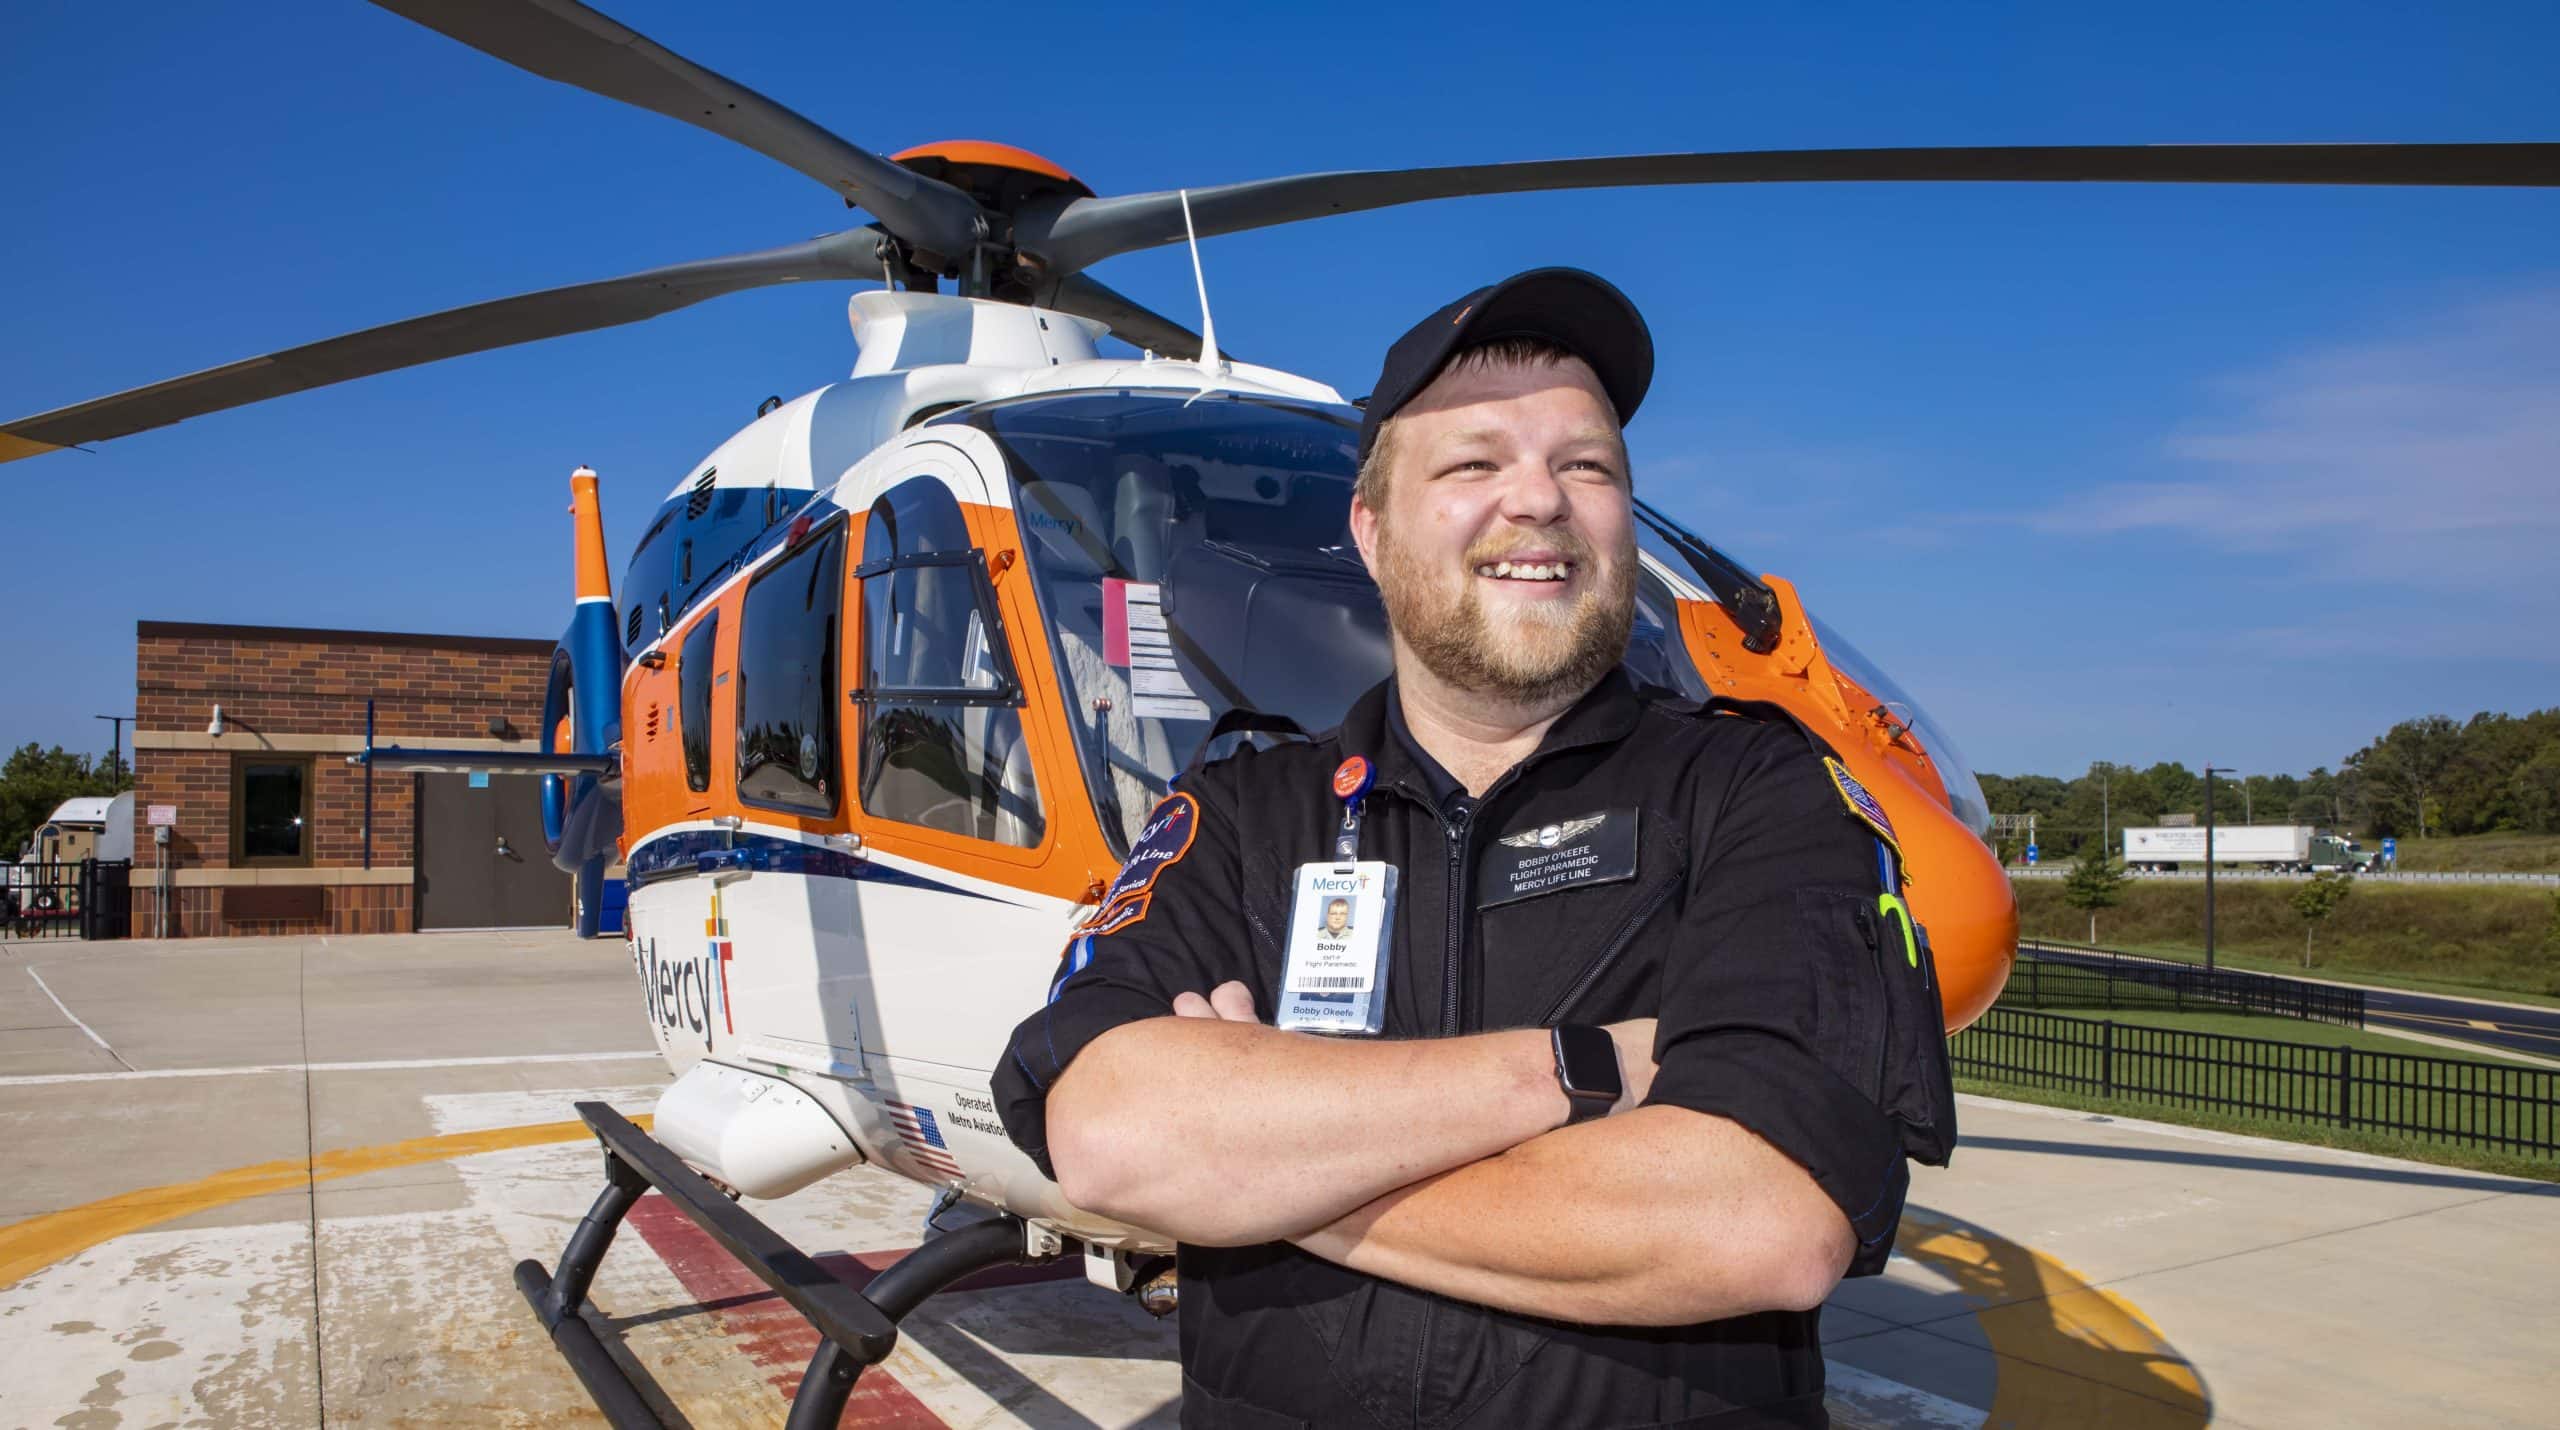 Bobby OKeefe stands in front of a Mercy Life Line Helicopter